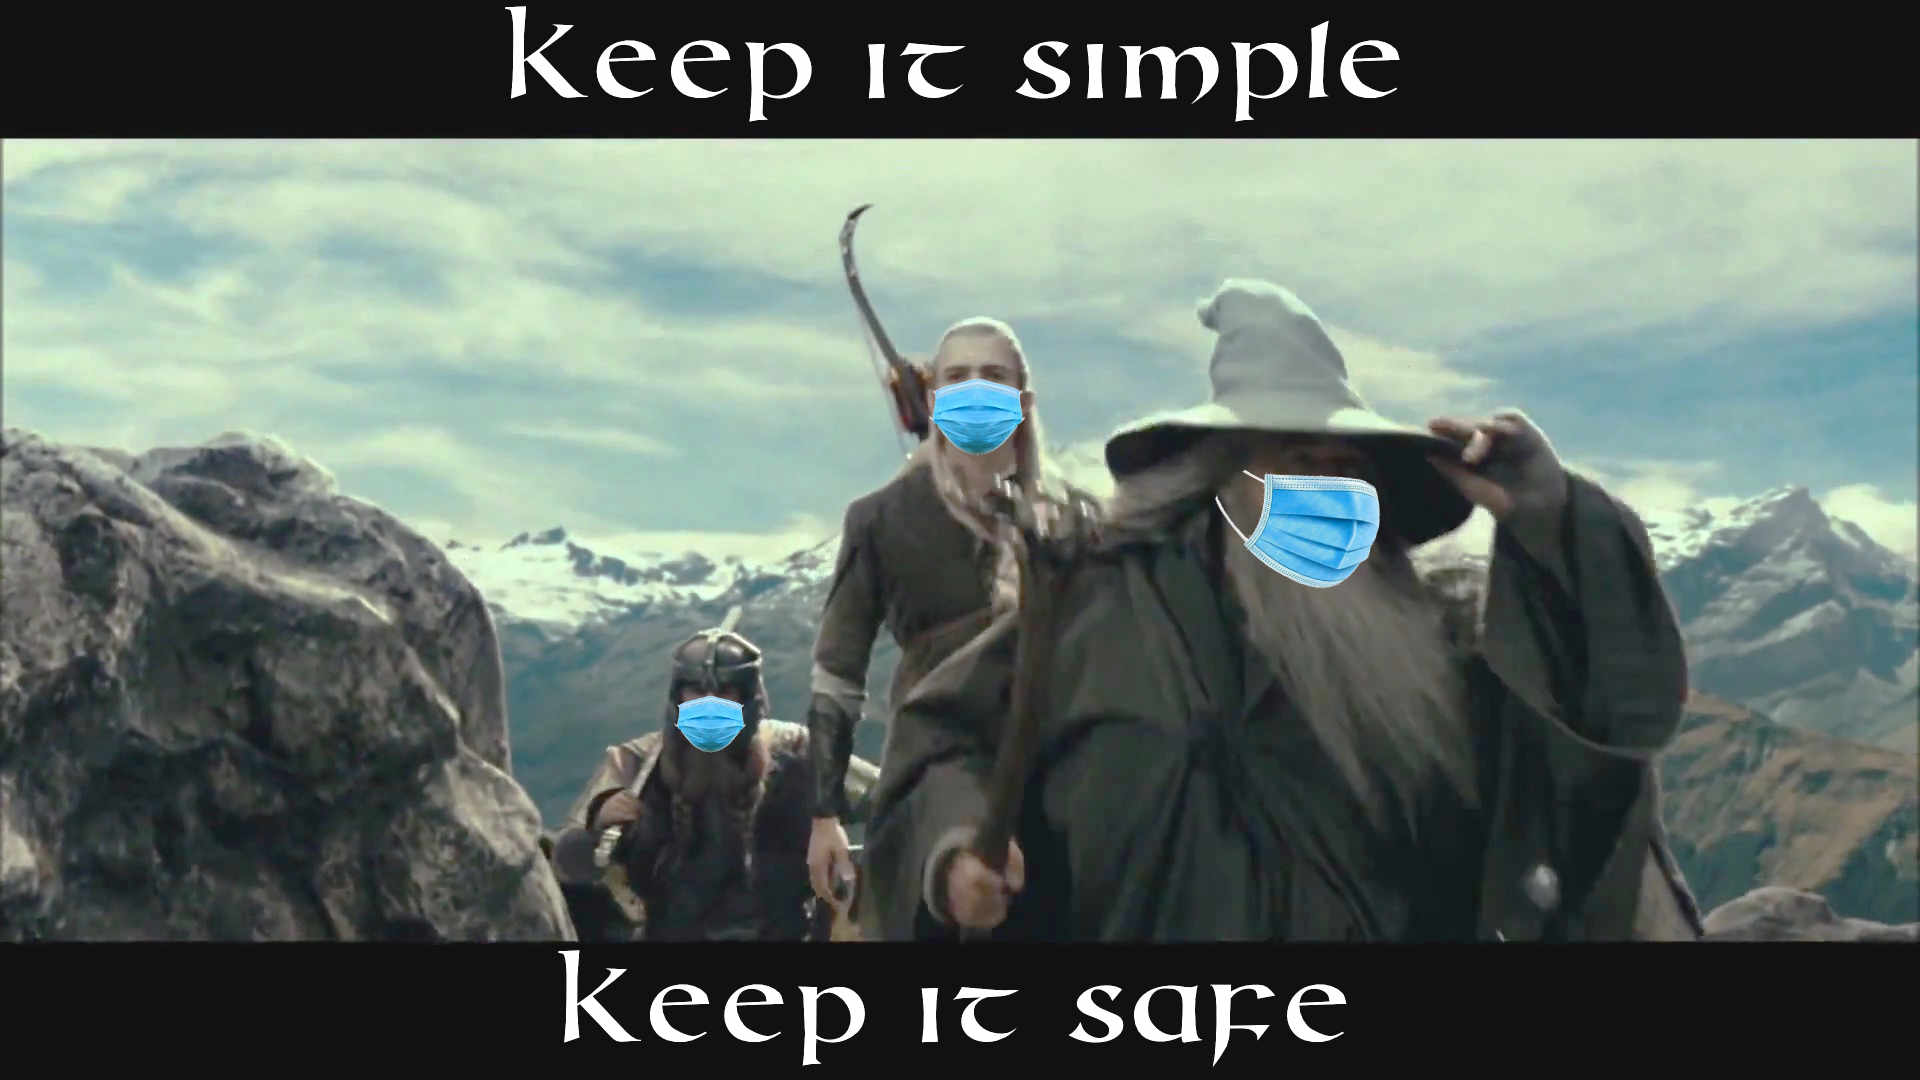 A screenshot from one of the “The Lord of The Rings” movies, showing Gandalf, Legolas, and Gimli hiking up a hill (with the others behind, out of frame), edited to have masks on all three visible faces, with the caption “Keep it simple” above and “Keep it safe” below.